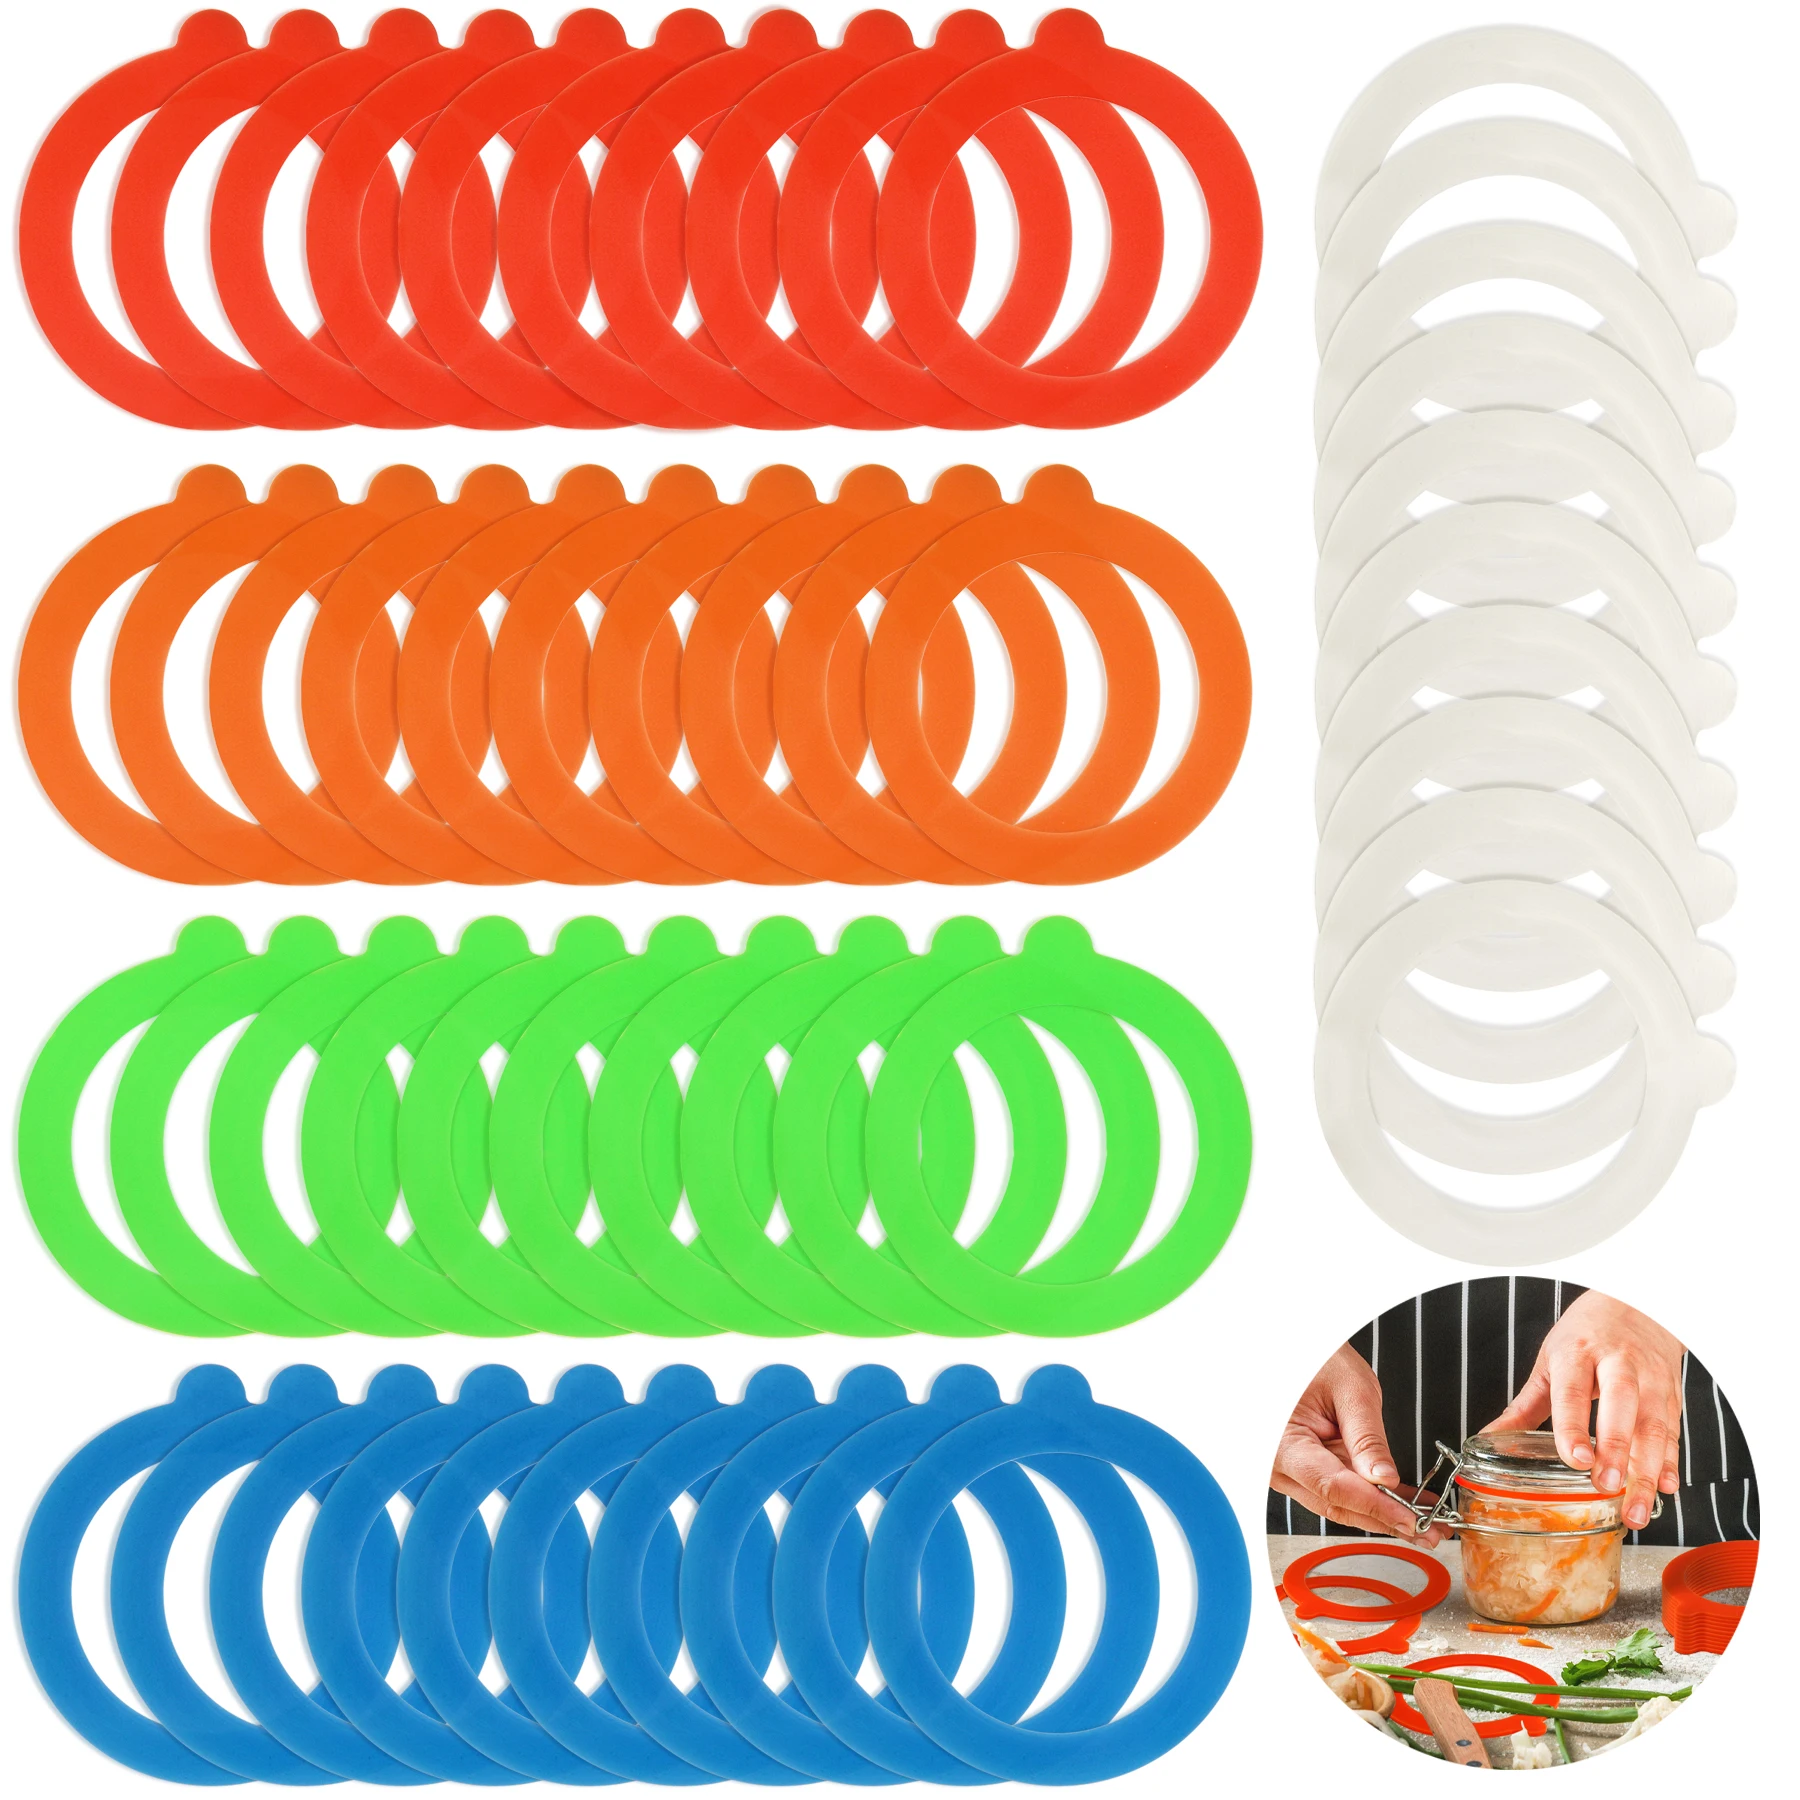 

10Pcs Silicone Jar Gaskets Food Storege Jars Replacement Airtight Leak-Proof Rubber Seals Rings Fits Regular Mouth Canning